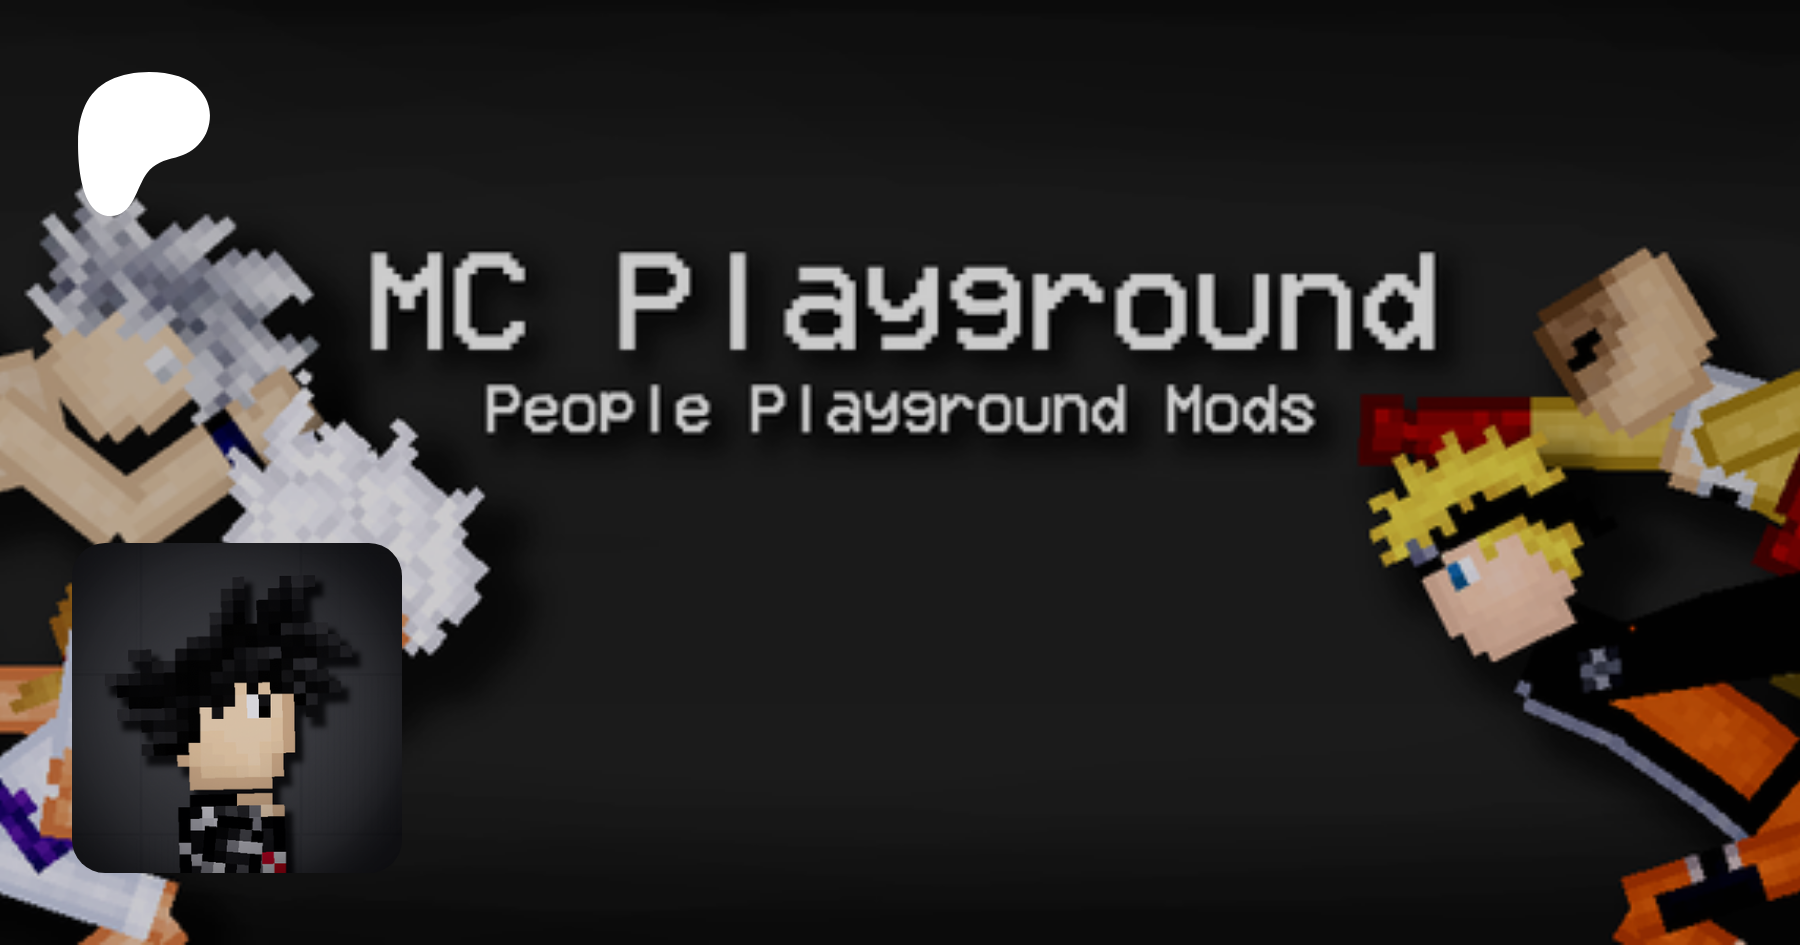 MC Playground, Great Mods from a Great Team